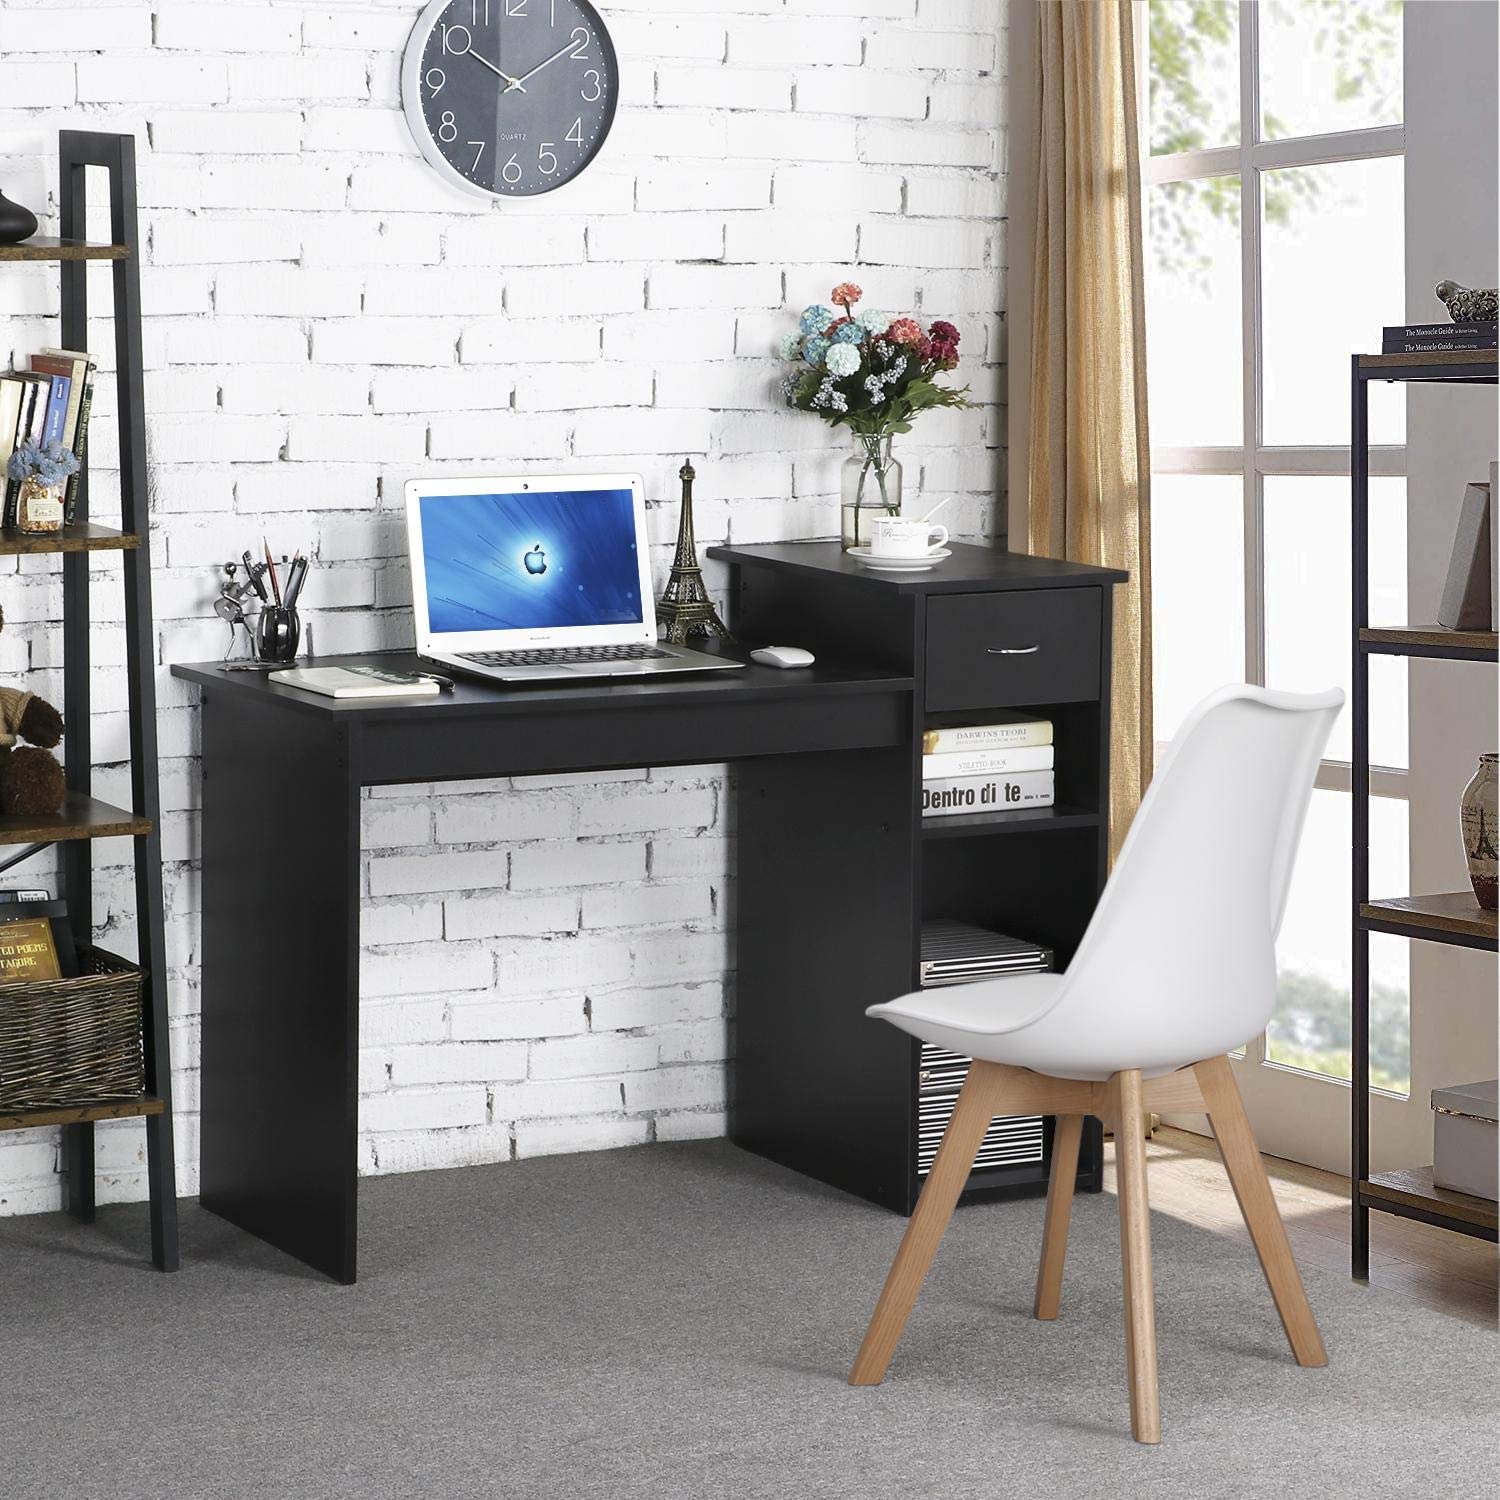 Topeakmart Modern Compact Computer Desk Study Writing Table Workstation with Drawers and Printer Shelf for Small Spaces Home Office Furniture